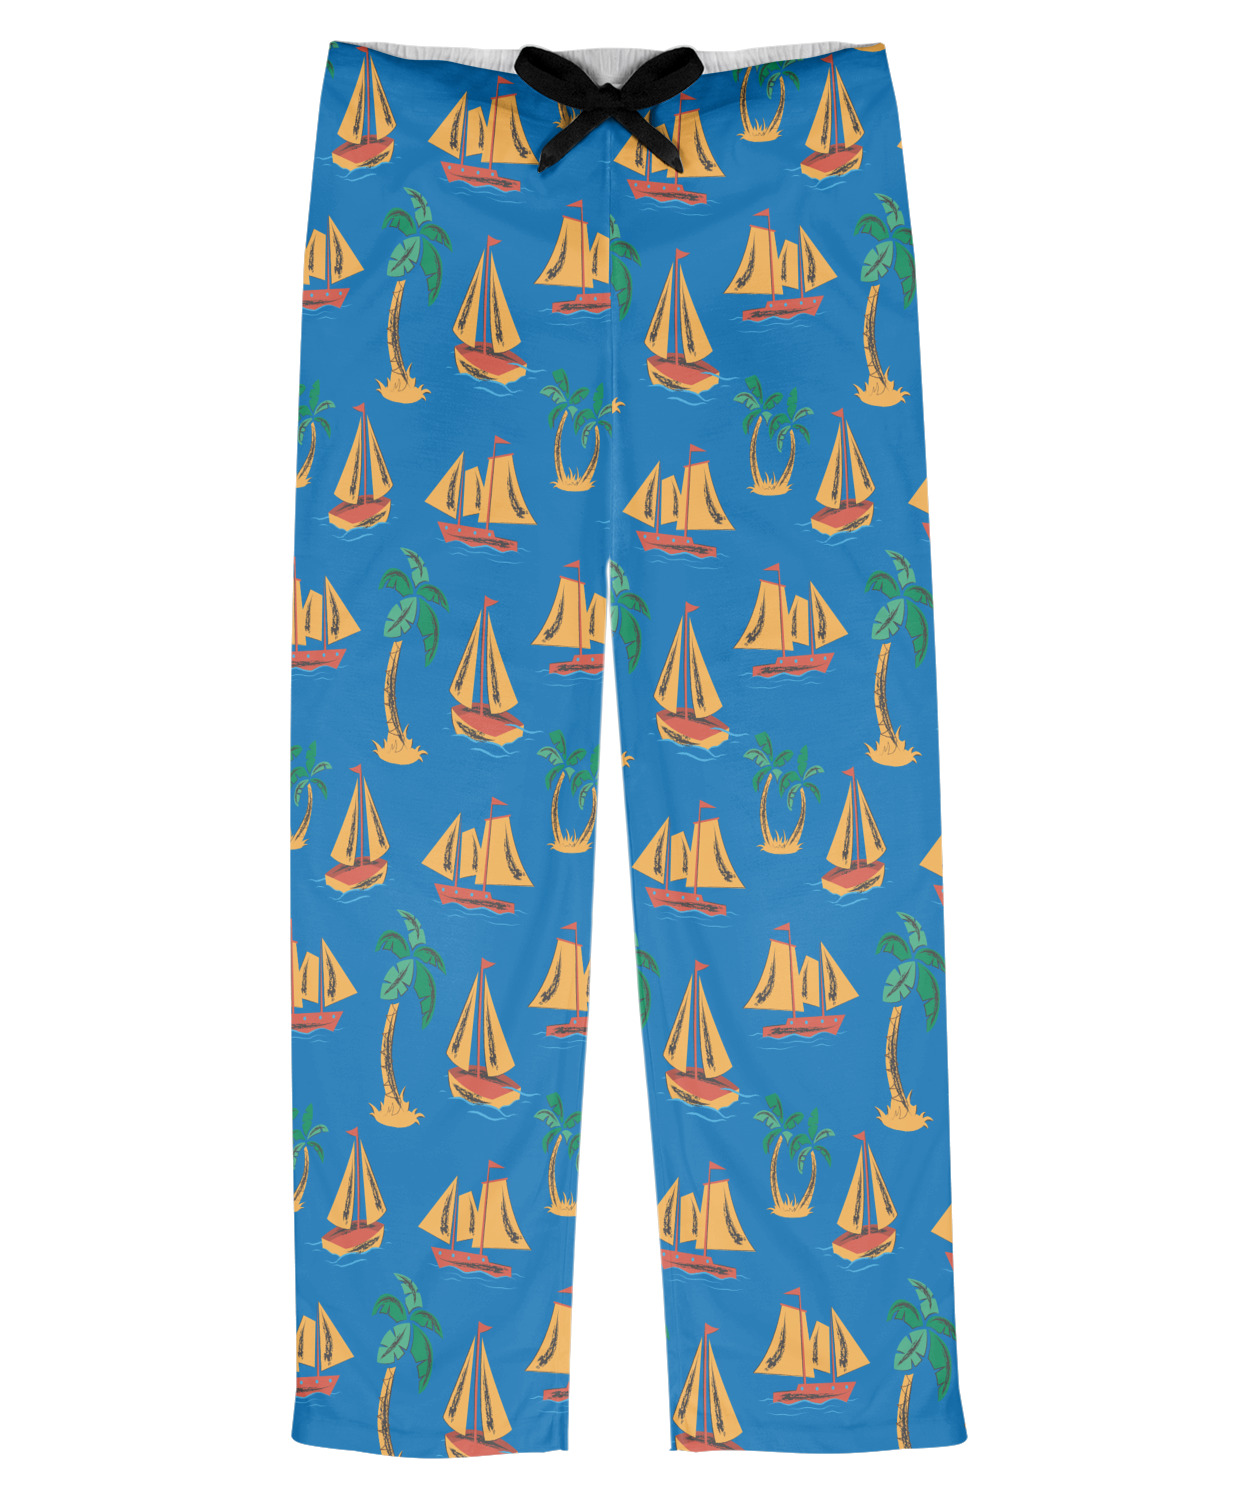 Boats & Palm Trees Mens Pajama Pants (Personalized) - YouCustomizeIt